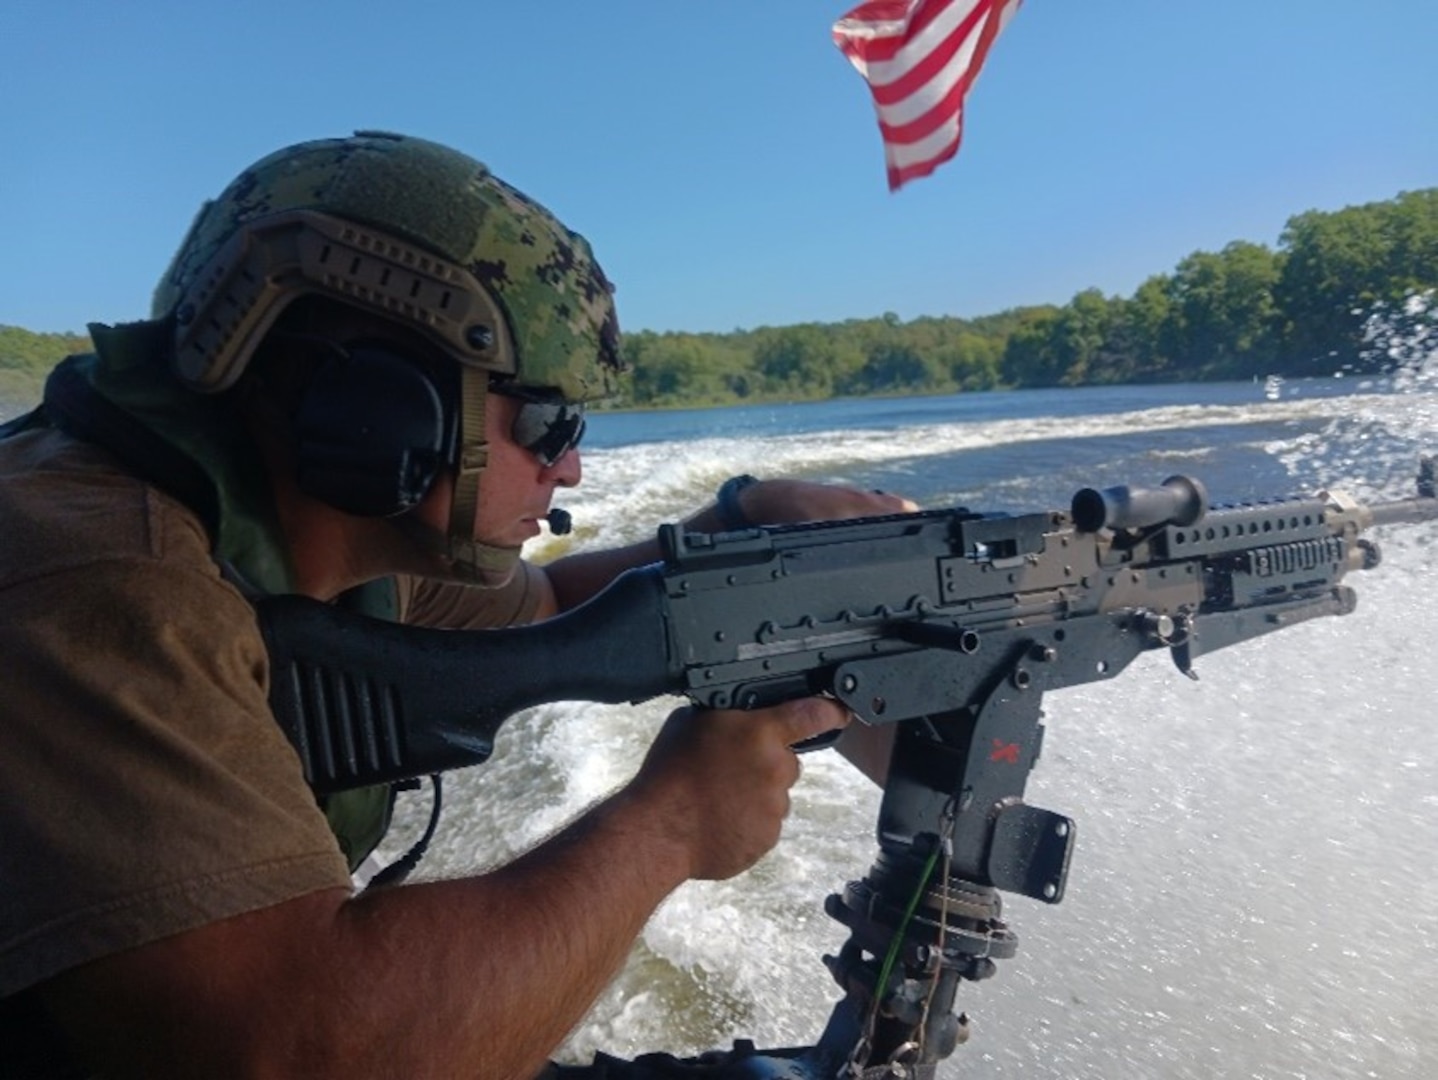 Petty Officer 2nd Class Nicholas Lusk, a PSU 309 tactical boat crew member, mans the aft M240B during a waterside security drill Sept. 19, 2022, as part of the training exercise Desired Effect held in Farmington, Missouri. During this evolution, an opposing force vessel began a simulated attack on two high value assets—one at anchor and one underway—initiating multiple high speed tactical maneuvers by the PSU. As the vessels dodged each other, their sharp turns and evasive maneuvers tossed up a heavy wake, and gave the boat crews a realistic training environment for boat handling and weapons employment. (U.S. Coast Guard photo by Petty Officer 3rd Class Tyler Frederick)